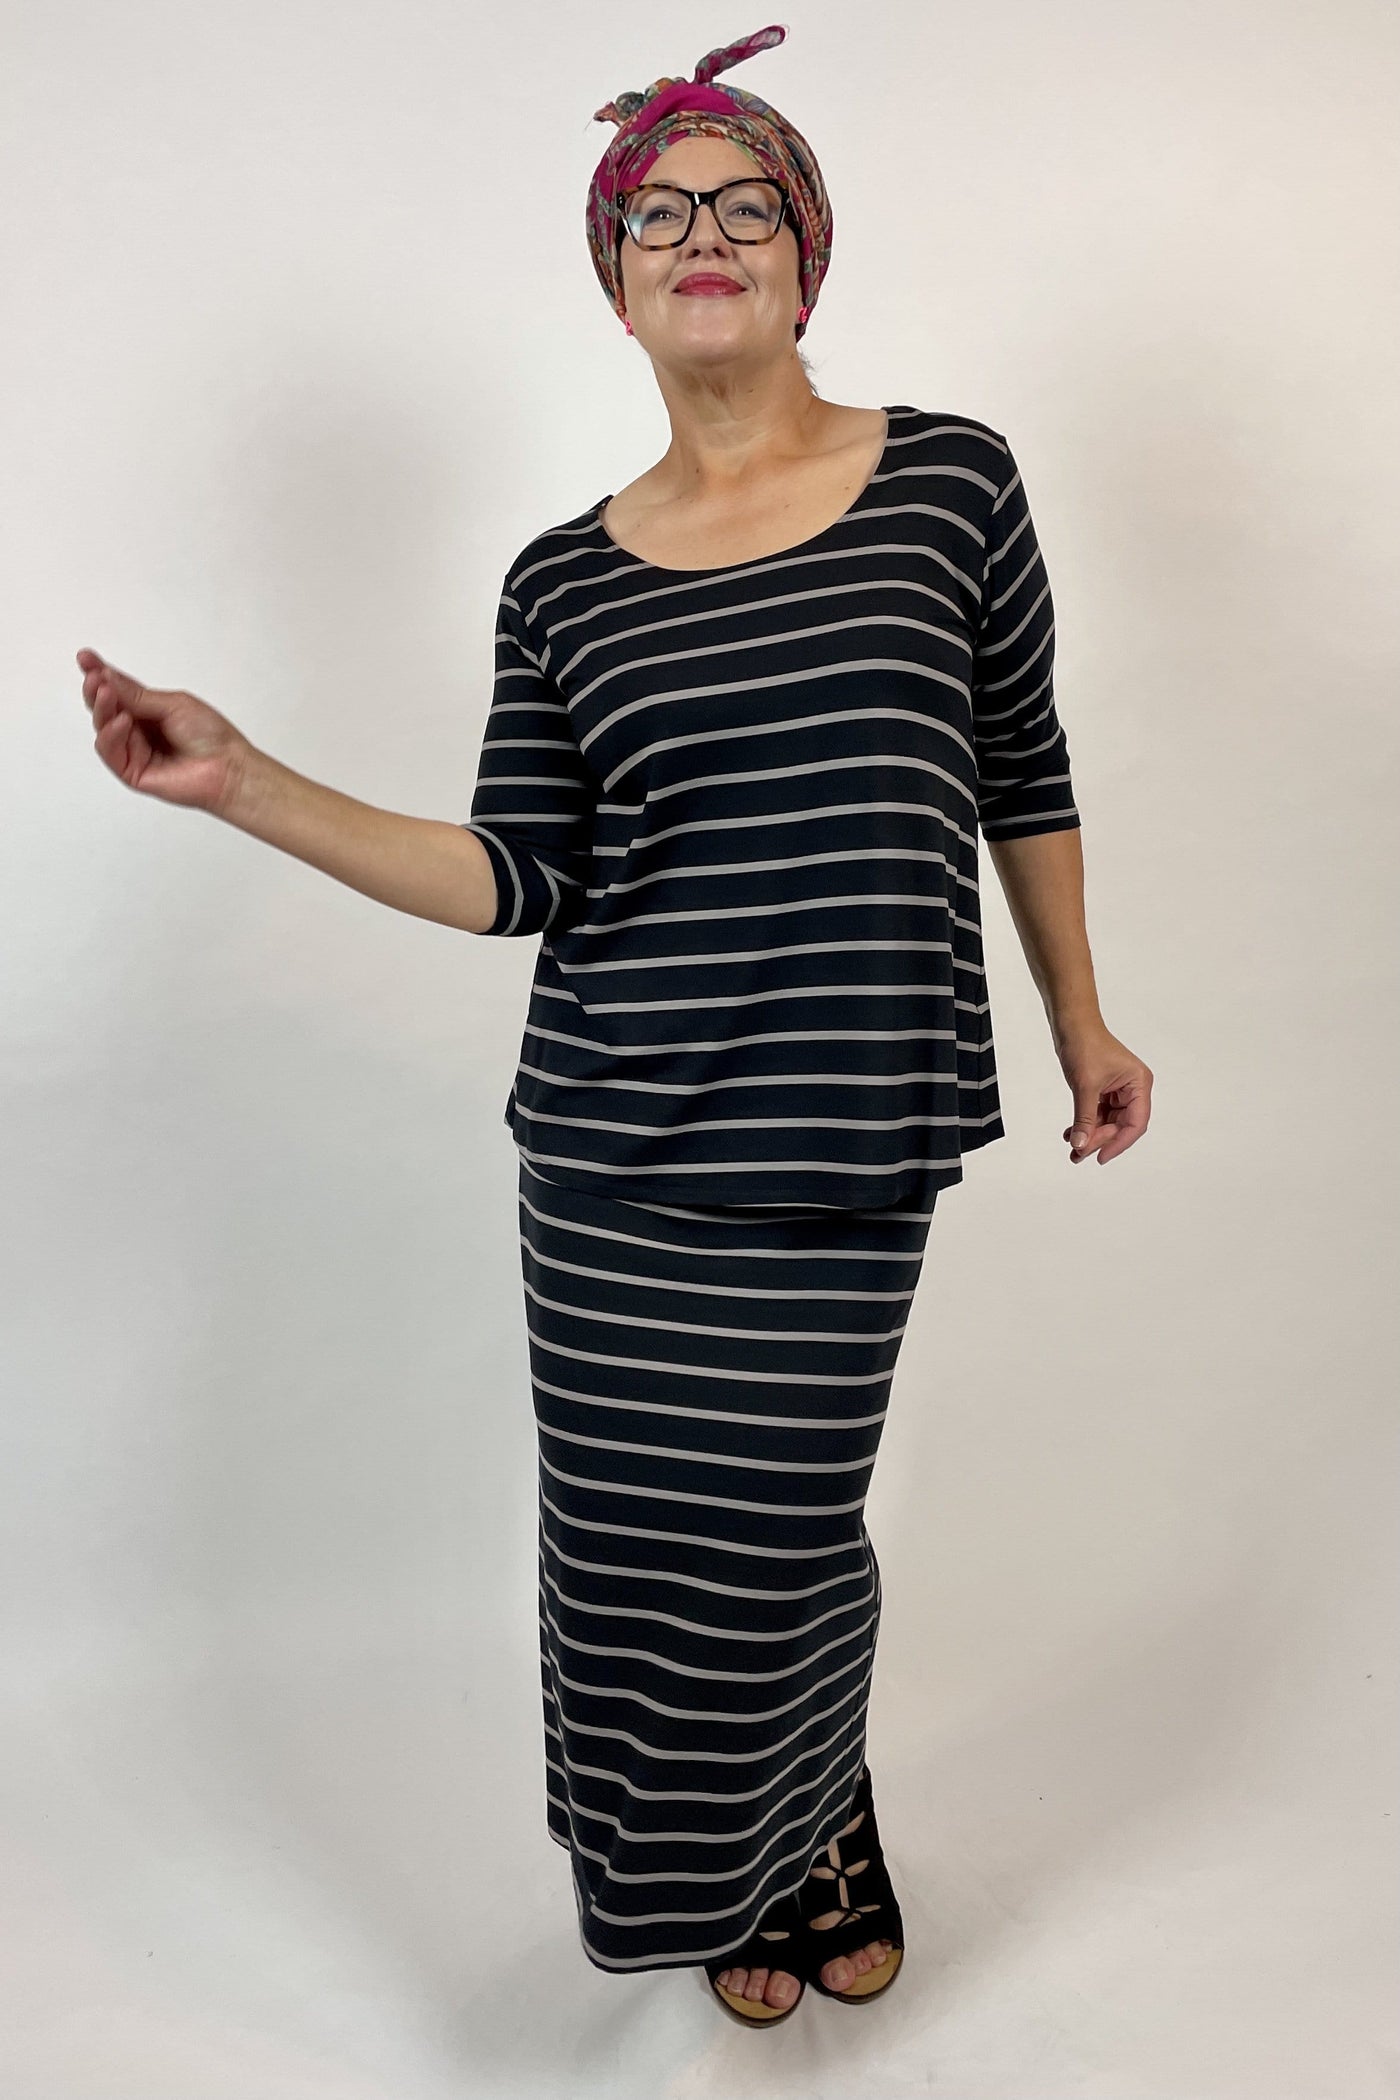 WEYRE Top relaxed scoop top charcoal and dove stripe